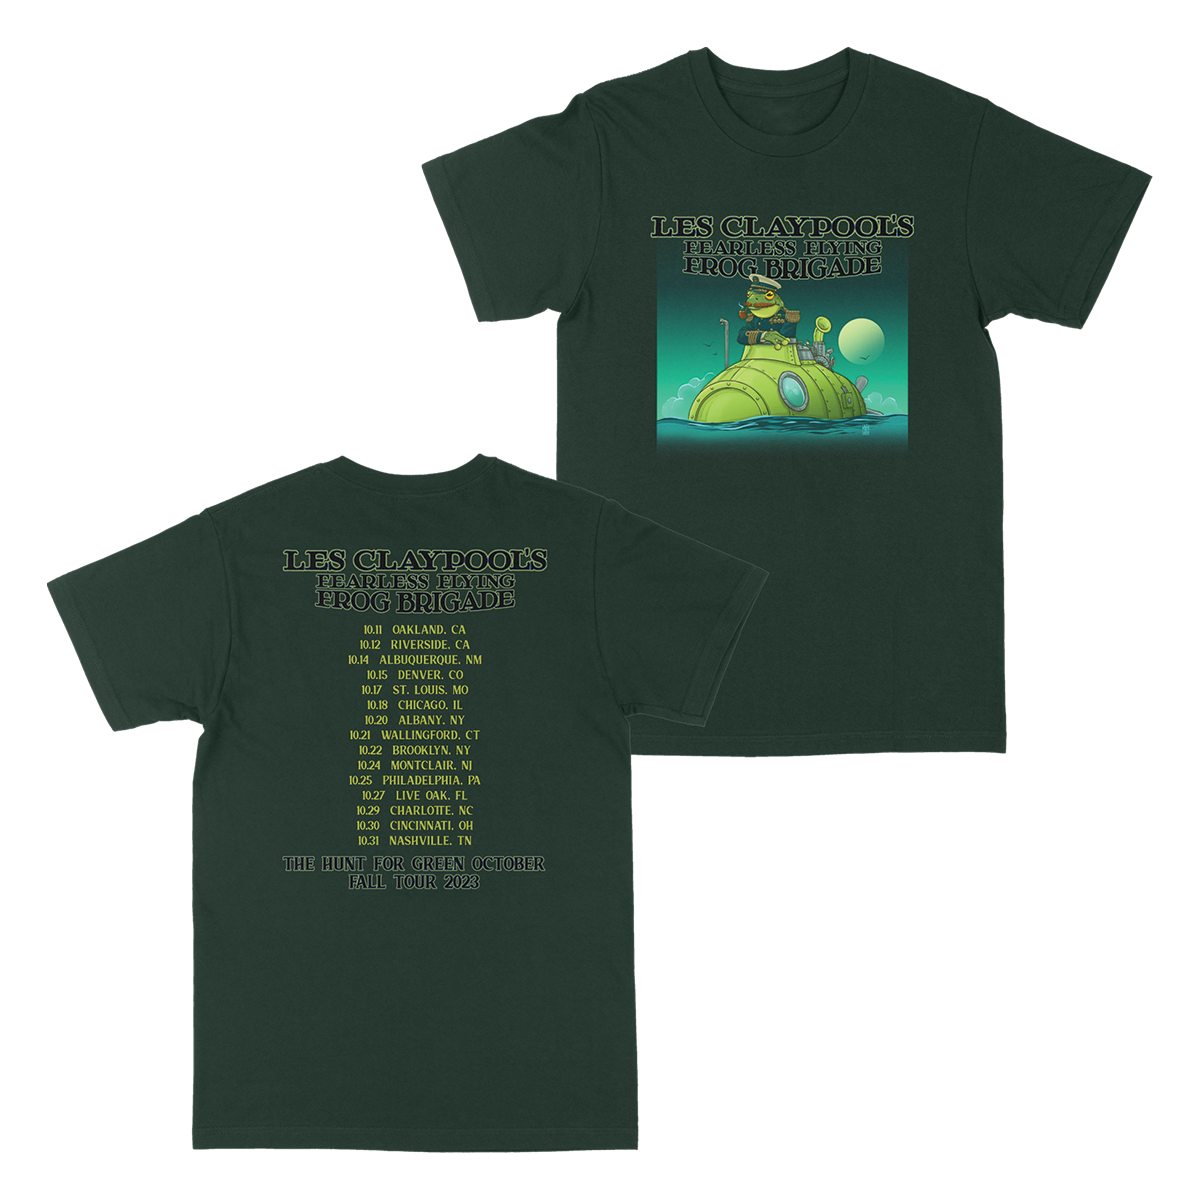 Les Claypool – Hunt for Green October Tour Tee